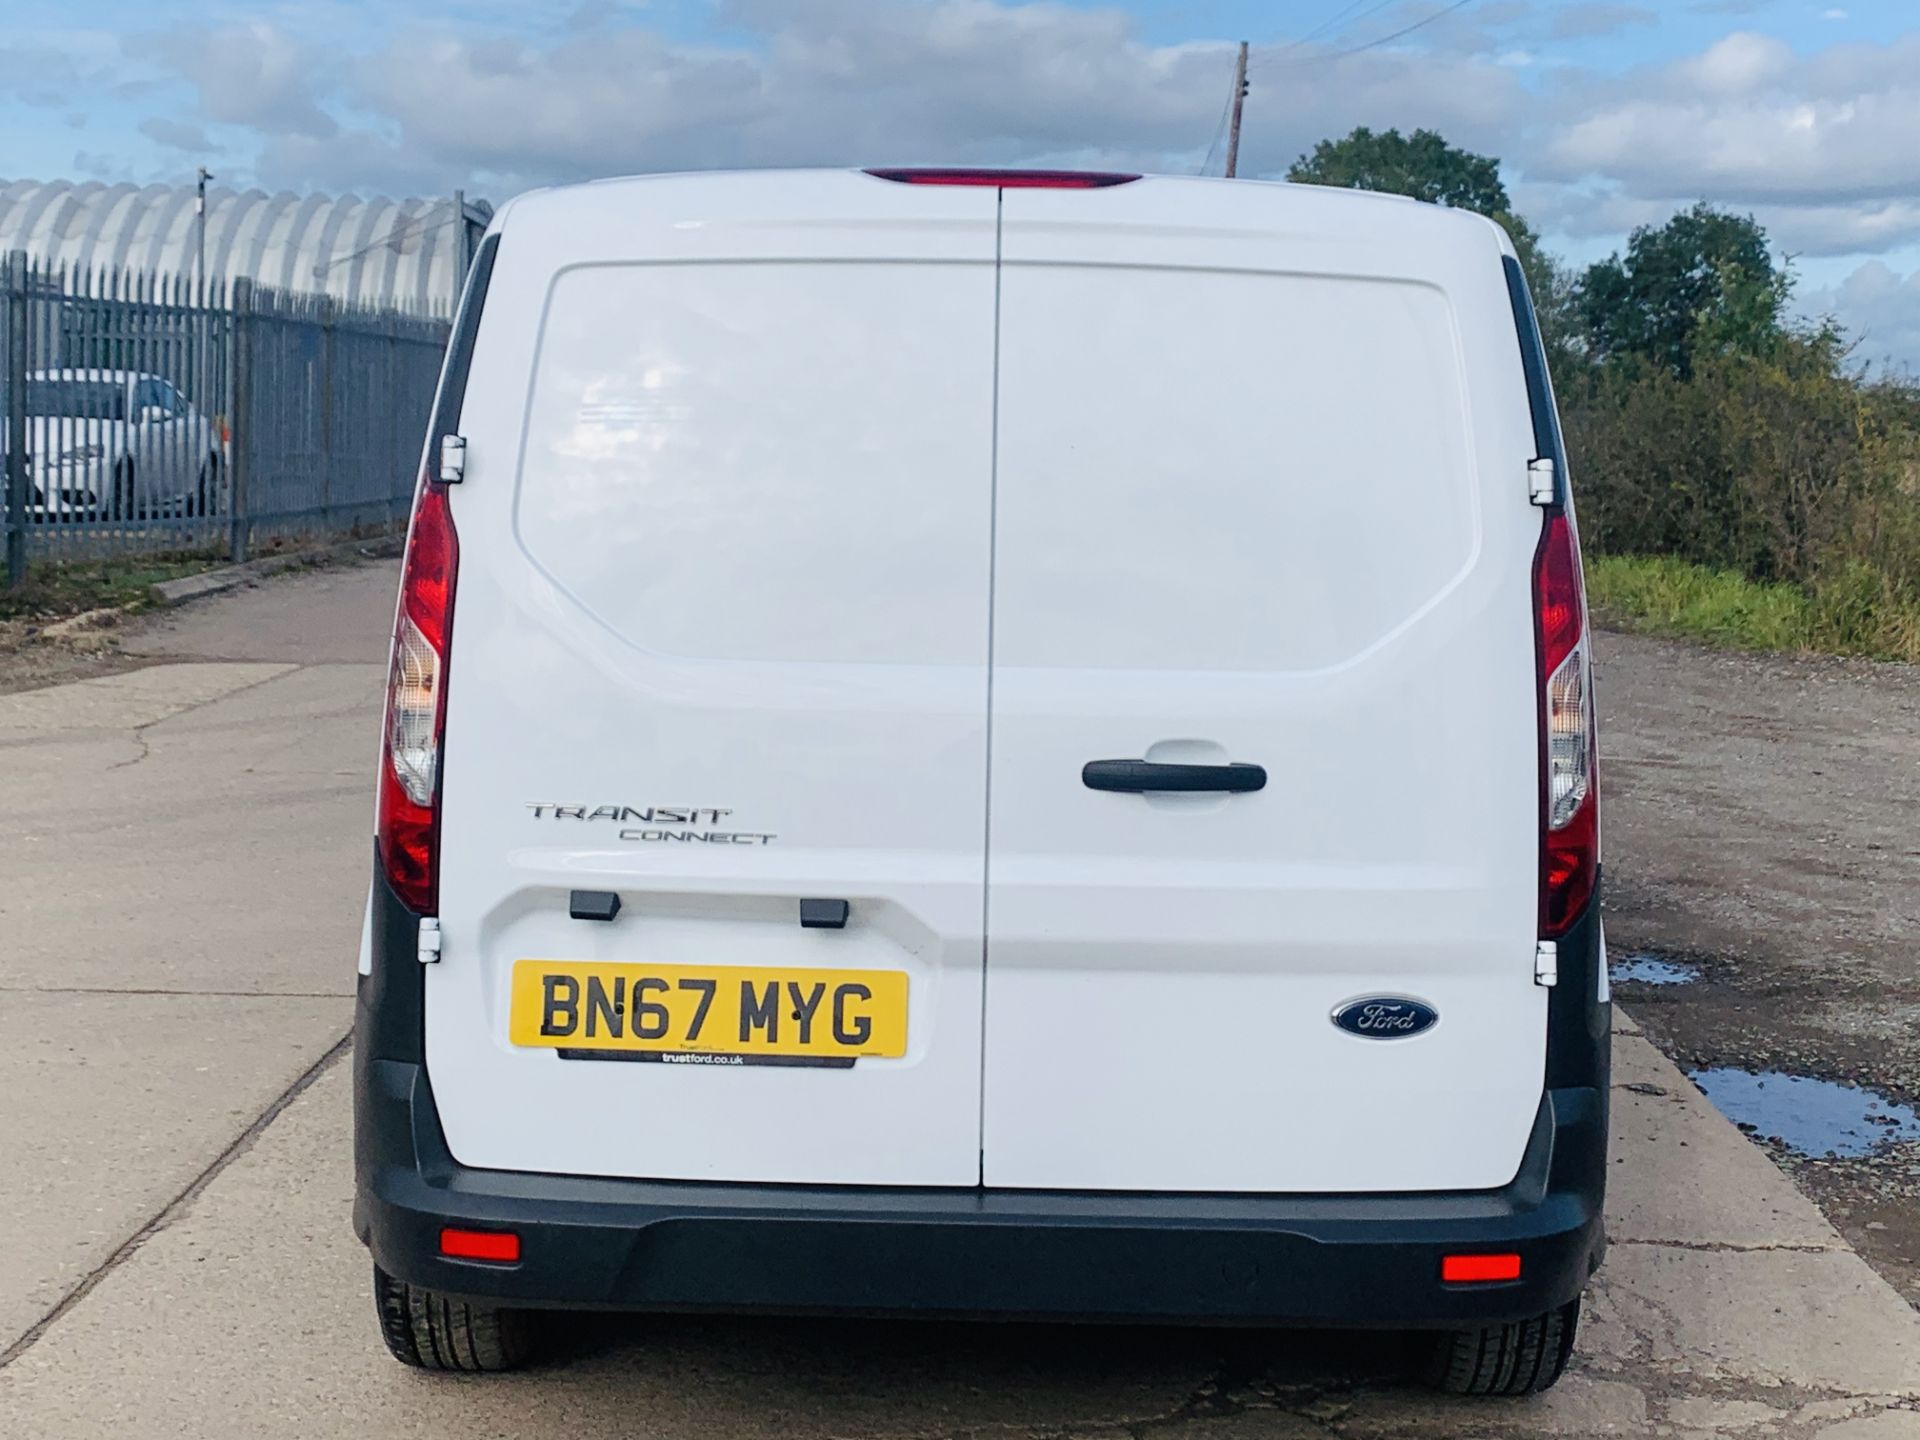 FORD TRANSIT CONNECT *LWB- 5 SEATER CREW VAN* (2018 - EURO 6) 1.5 TDCI - 100 BHP *AIR CON* (1 OWNER) - Image 11 of 40